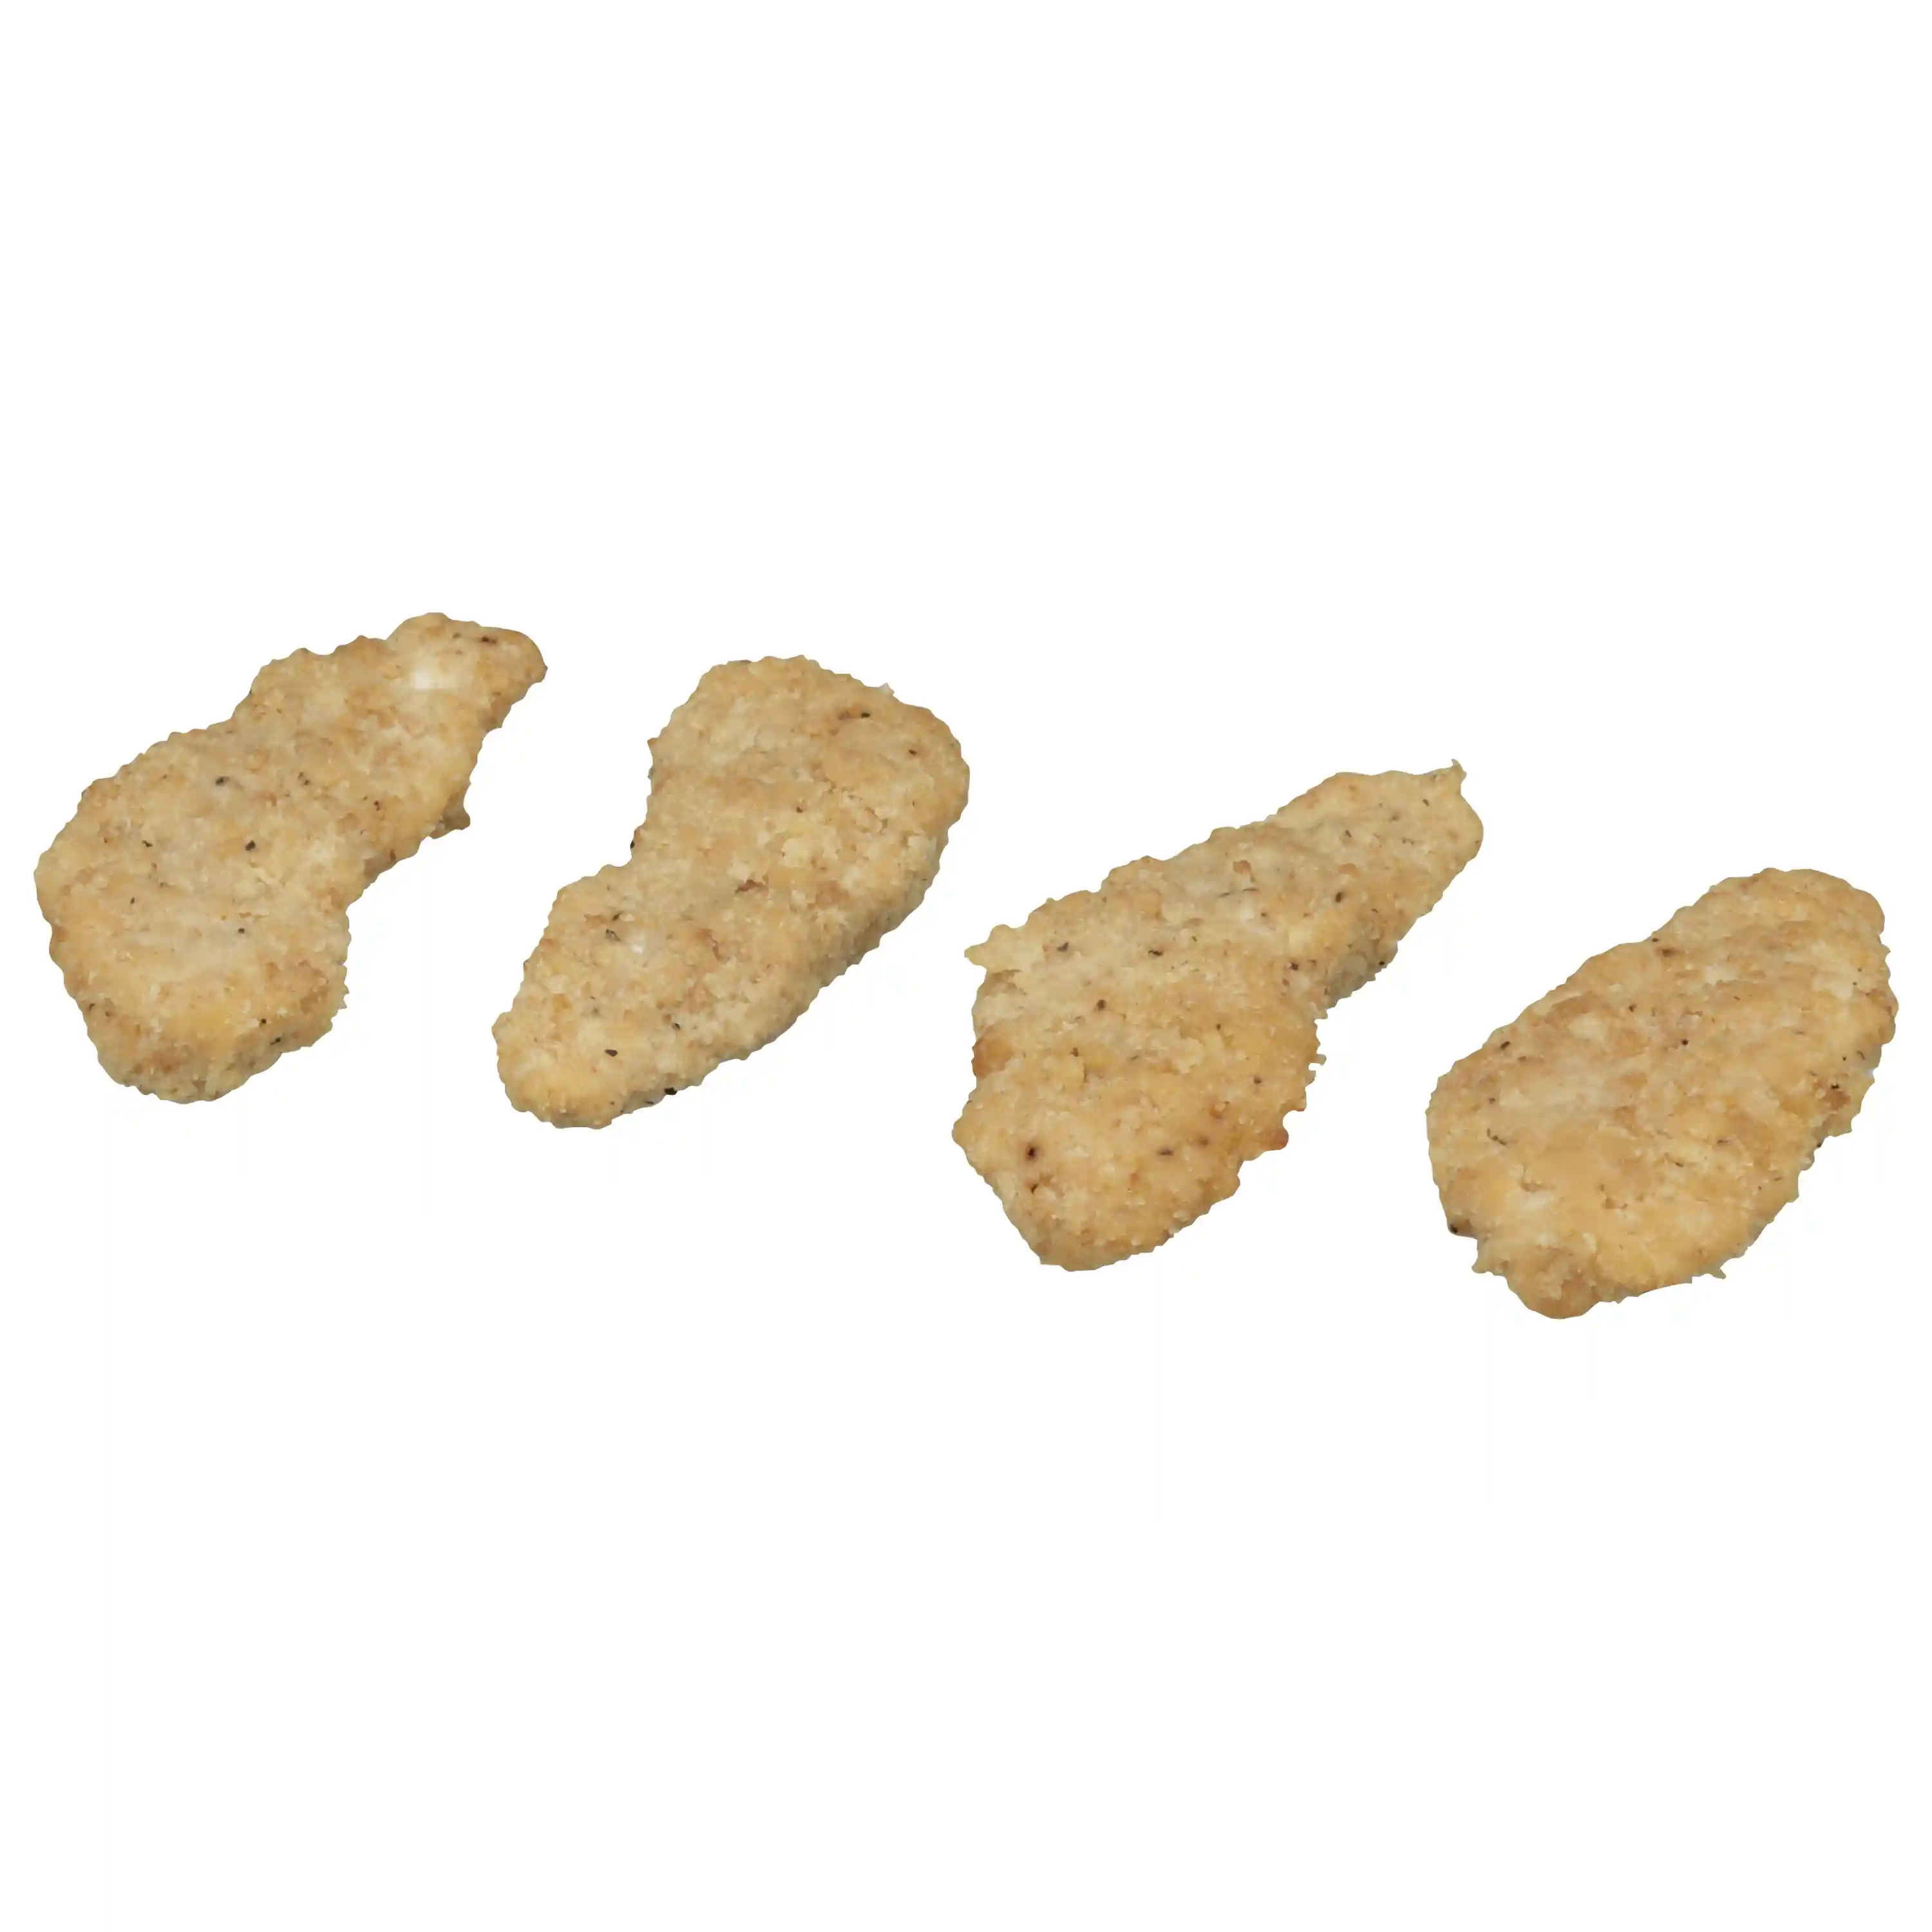 Tyson® Fully Cooked Whole Grain Breaded Homestyle MWWM Chicken Breast Strips, 1.50 oz._image_11